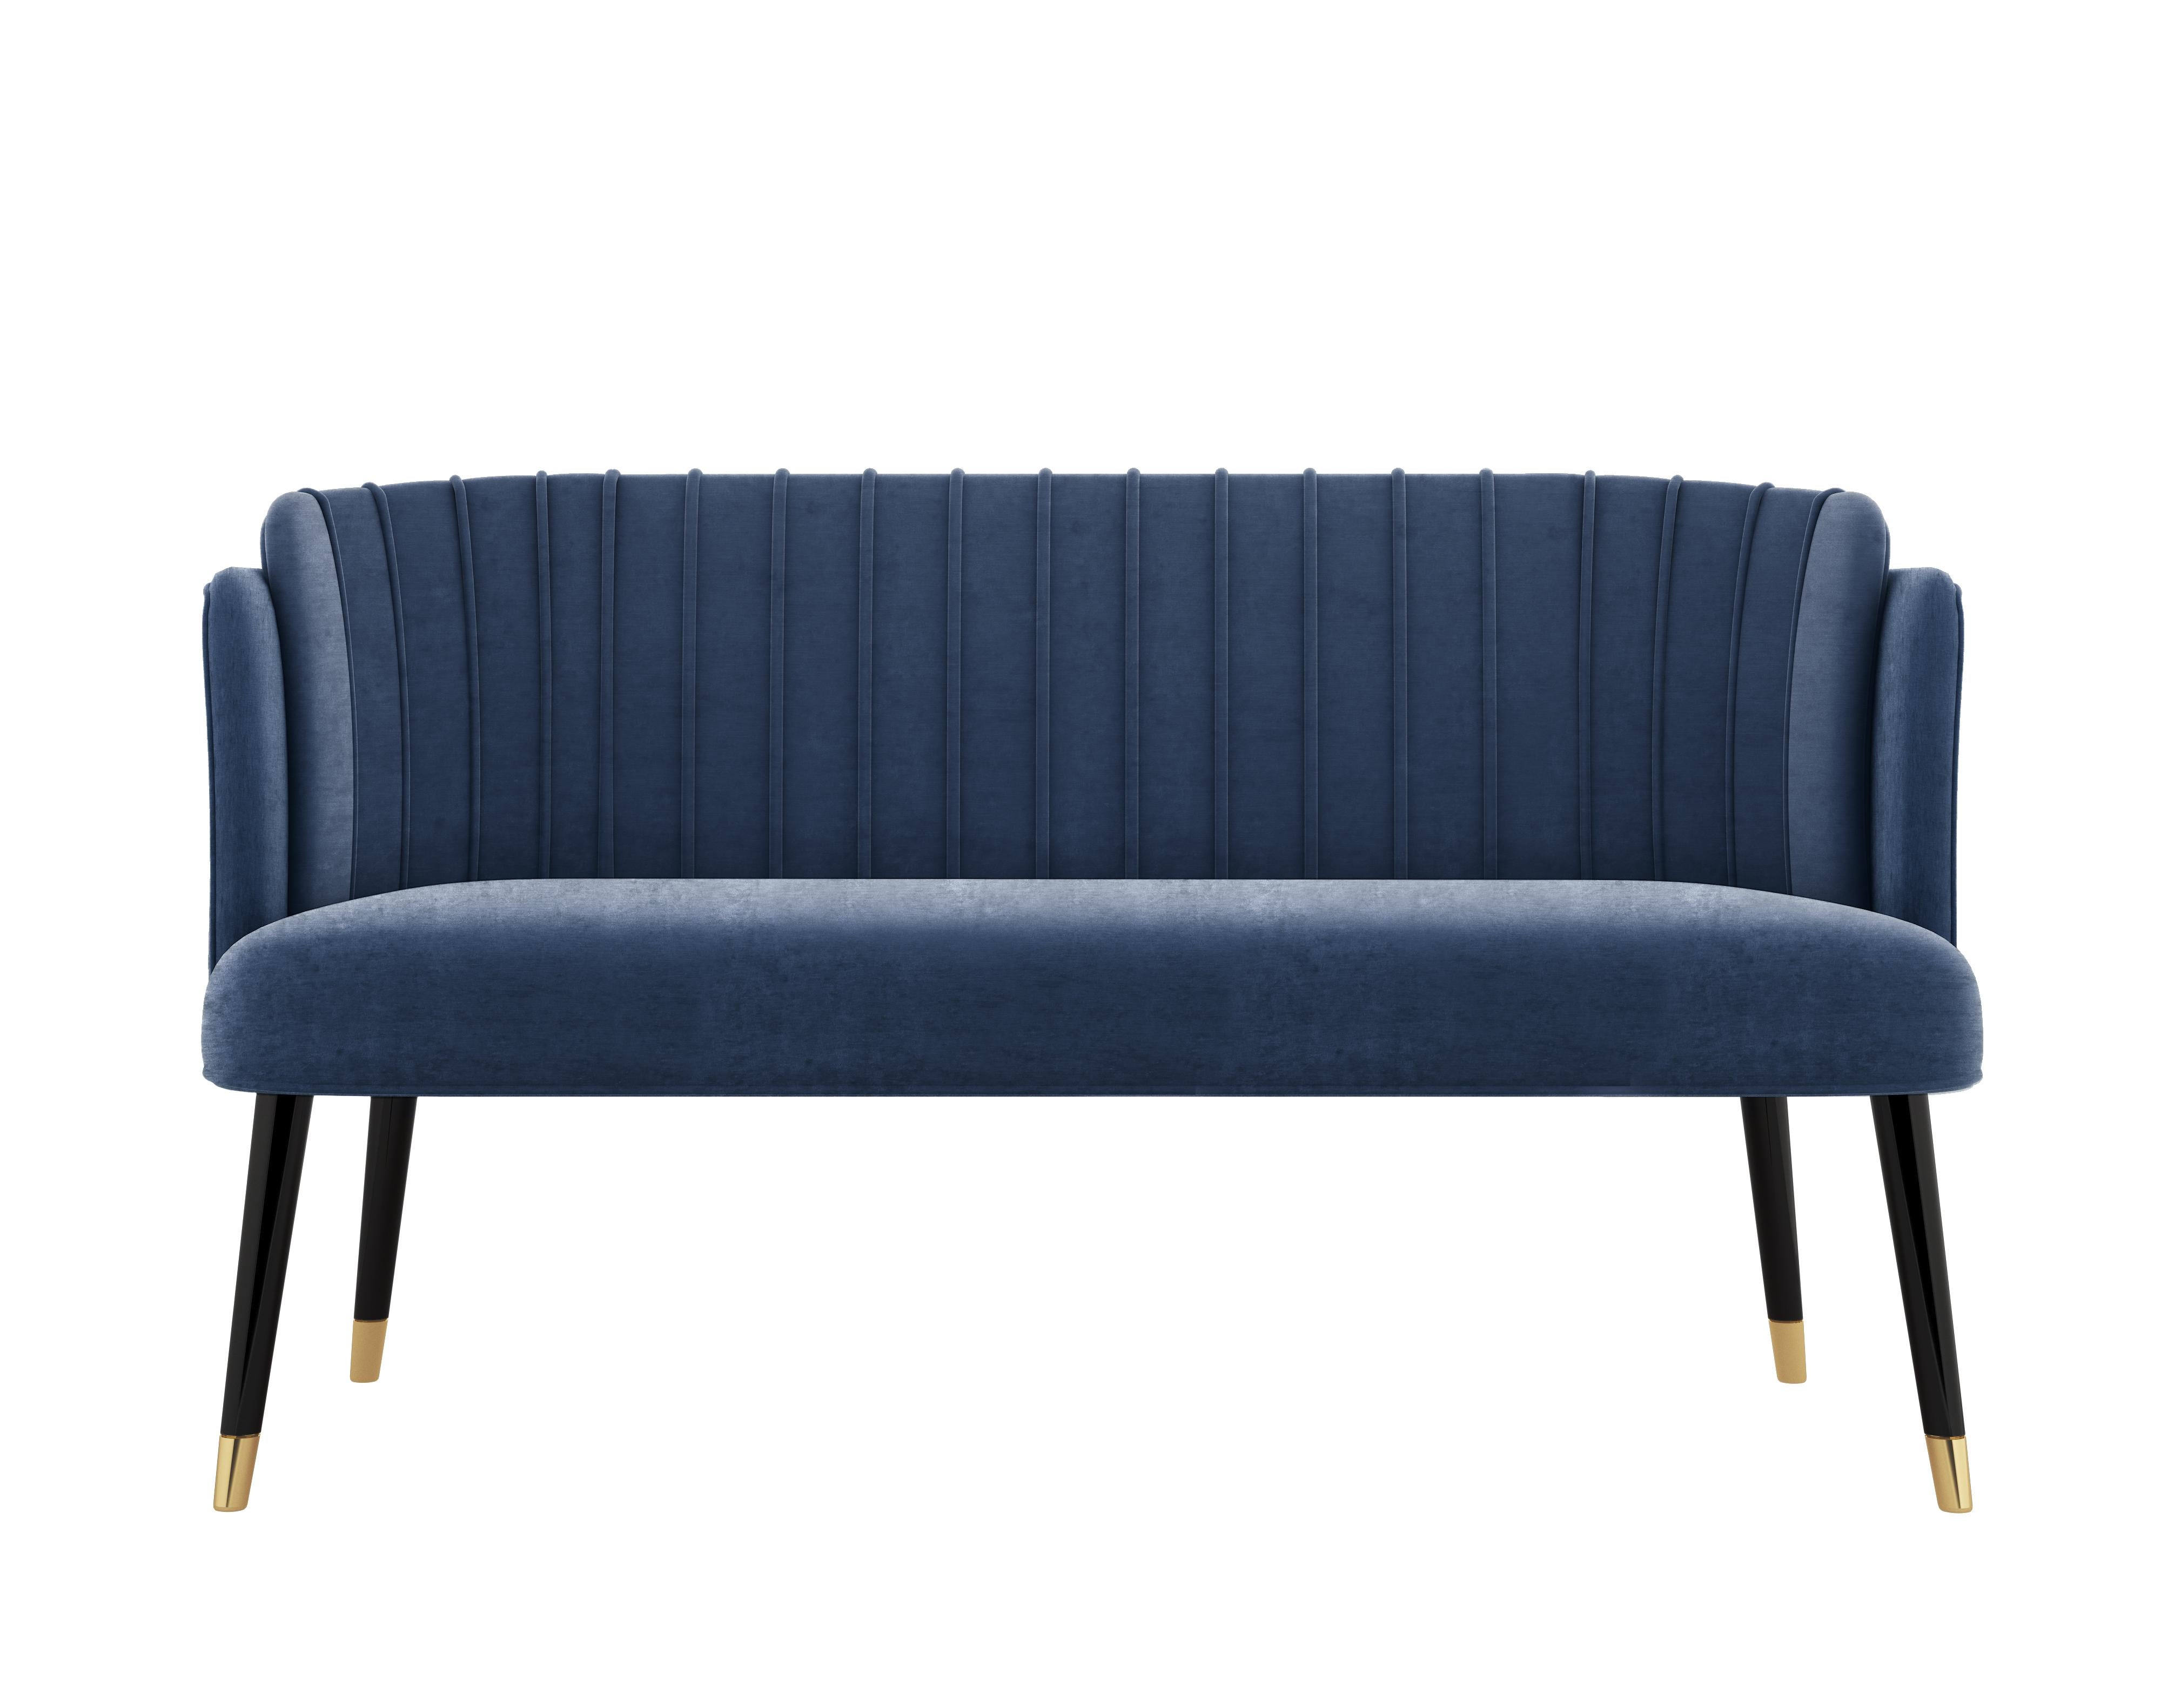 The Anita Mid-Century Modern twin seat is a piece where lush, beauty and delicacy hide the fierceness and unbridled sensuality of one of the 1950s iconic personalities: Anita Ekberg. This beautiful twin-seat has an exquisite velvet upholstery